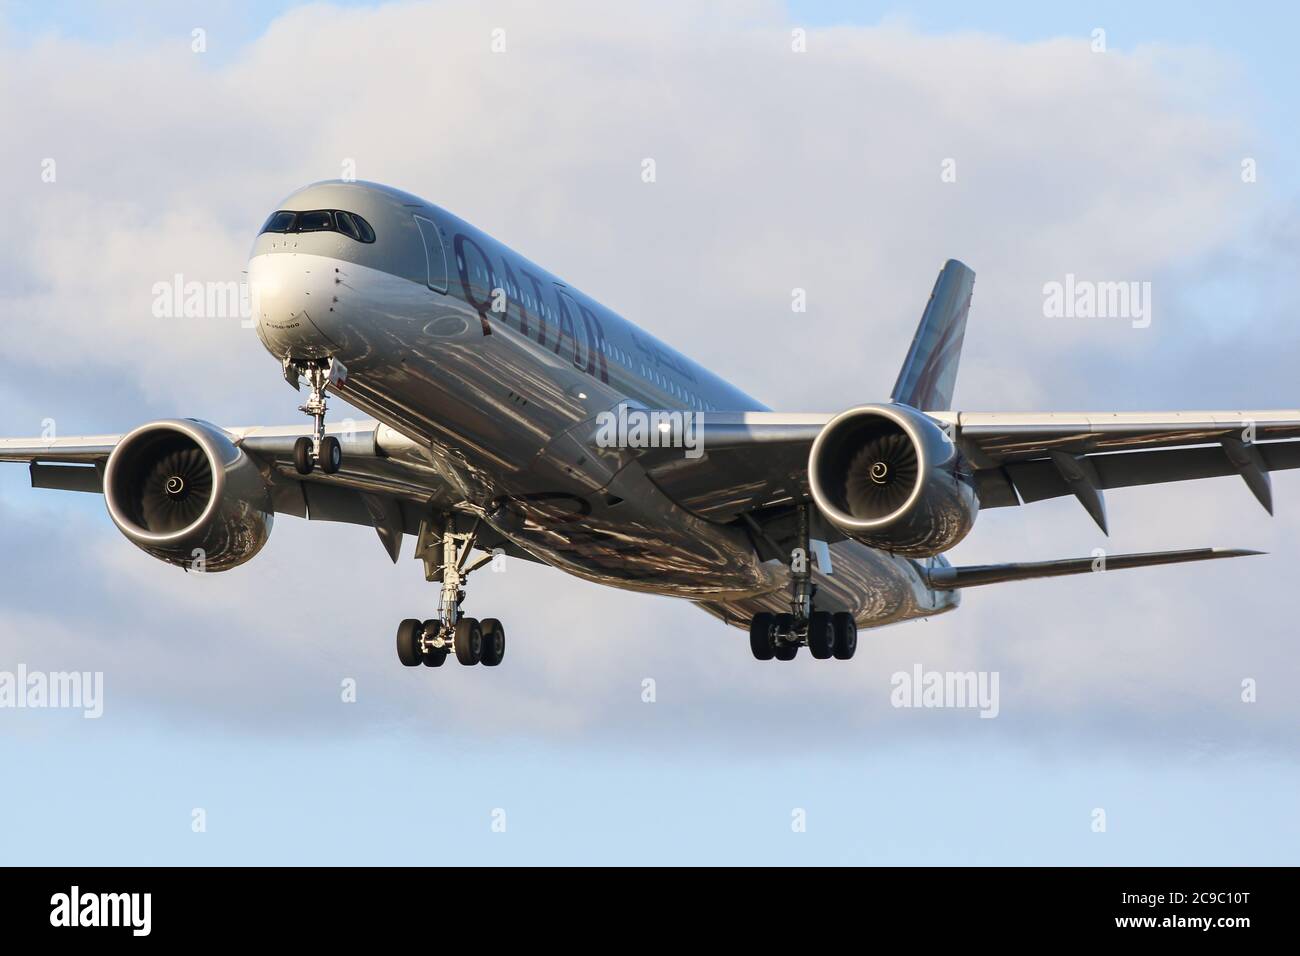 An Airbus A350 941 Flying For Qatar Airways Lands At London Heathrow Airport Stock Photo Alamy